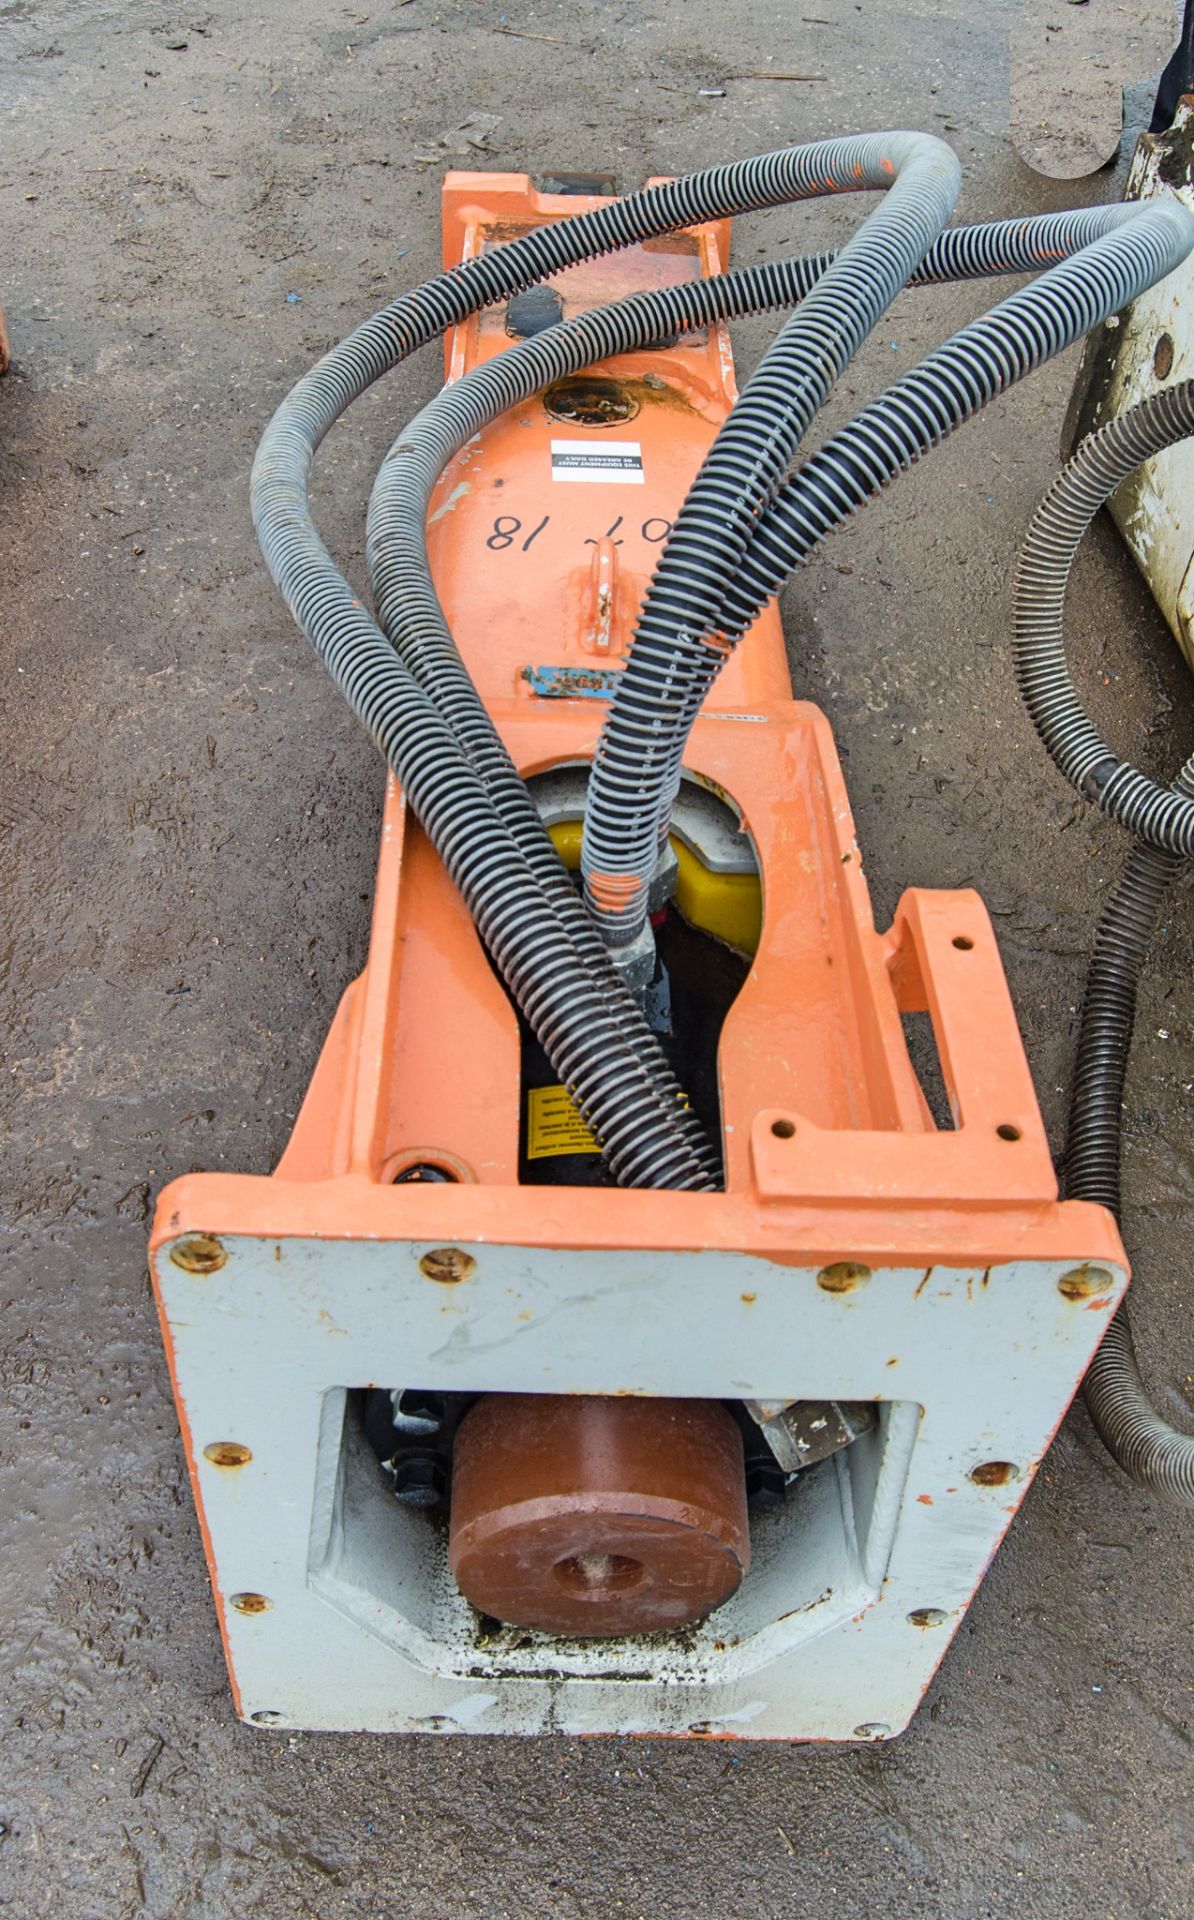 Construction Tools RX12L hydraulic breaker to suit 13-18 tonne excavator Year: 2019 S/N: DEQ190668 - Image 4 of 4